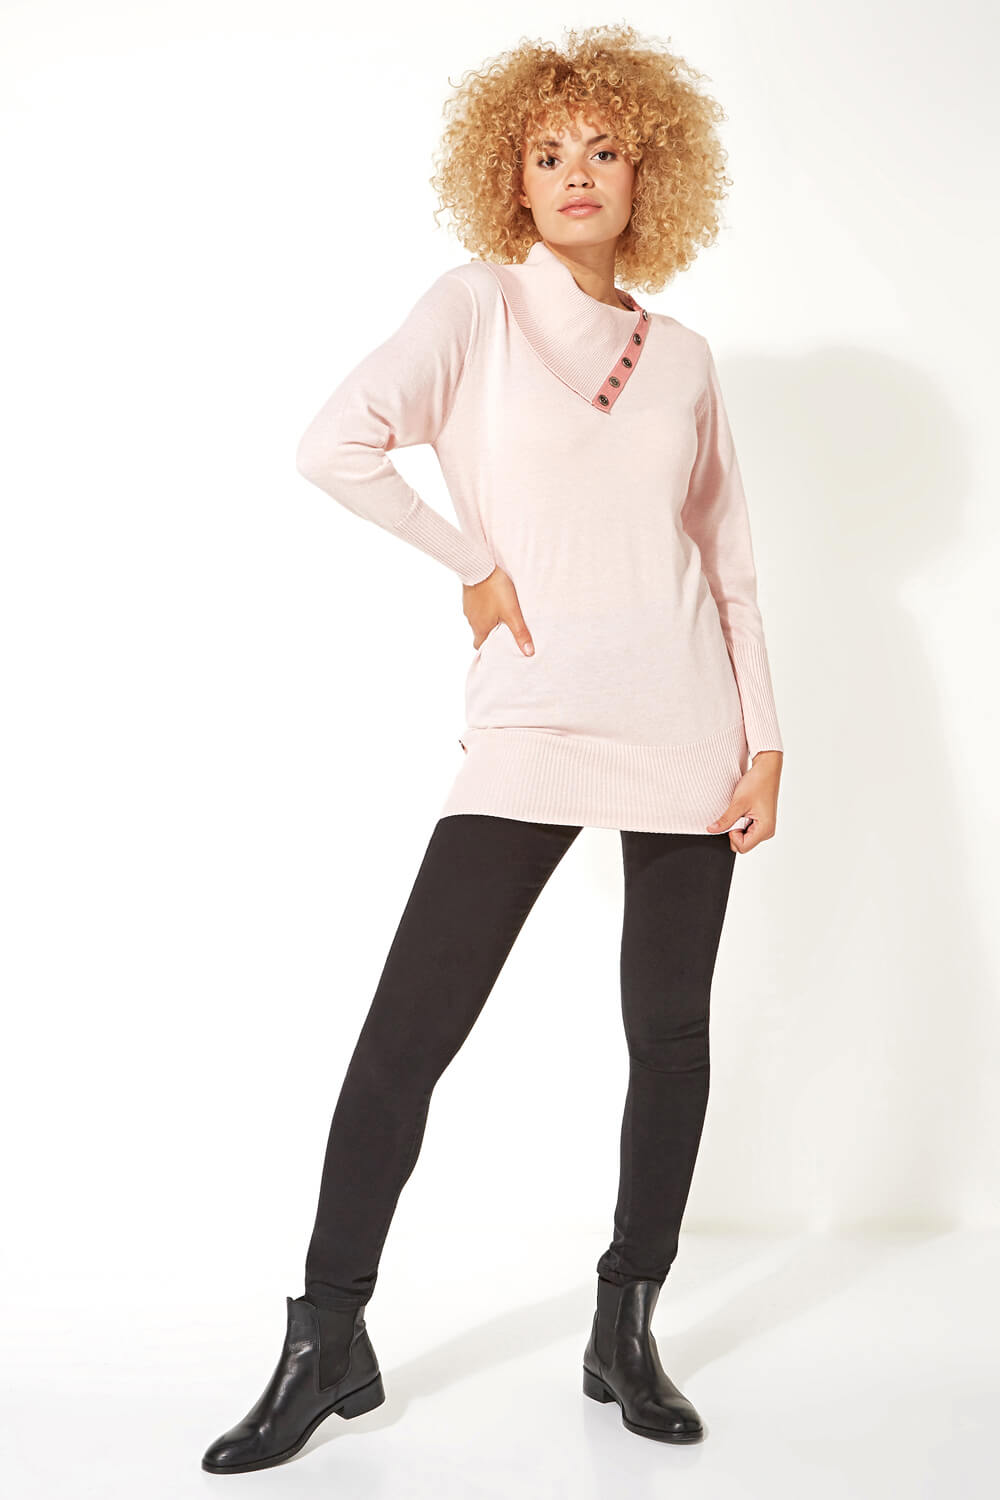 PINK Split Button Neck Tunic Jumper, Image 2 of 5